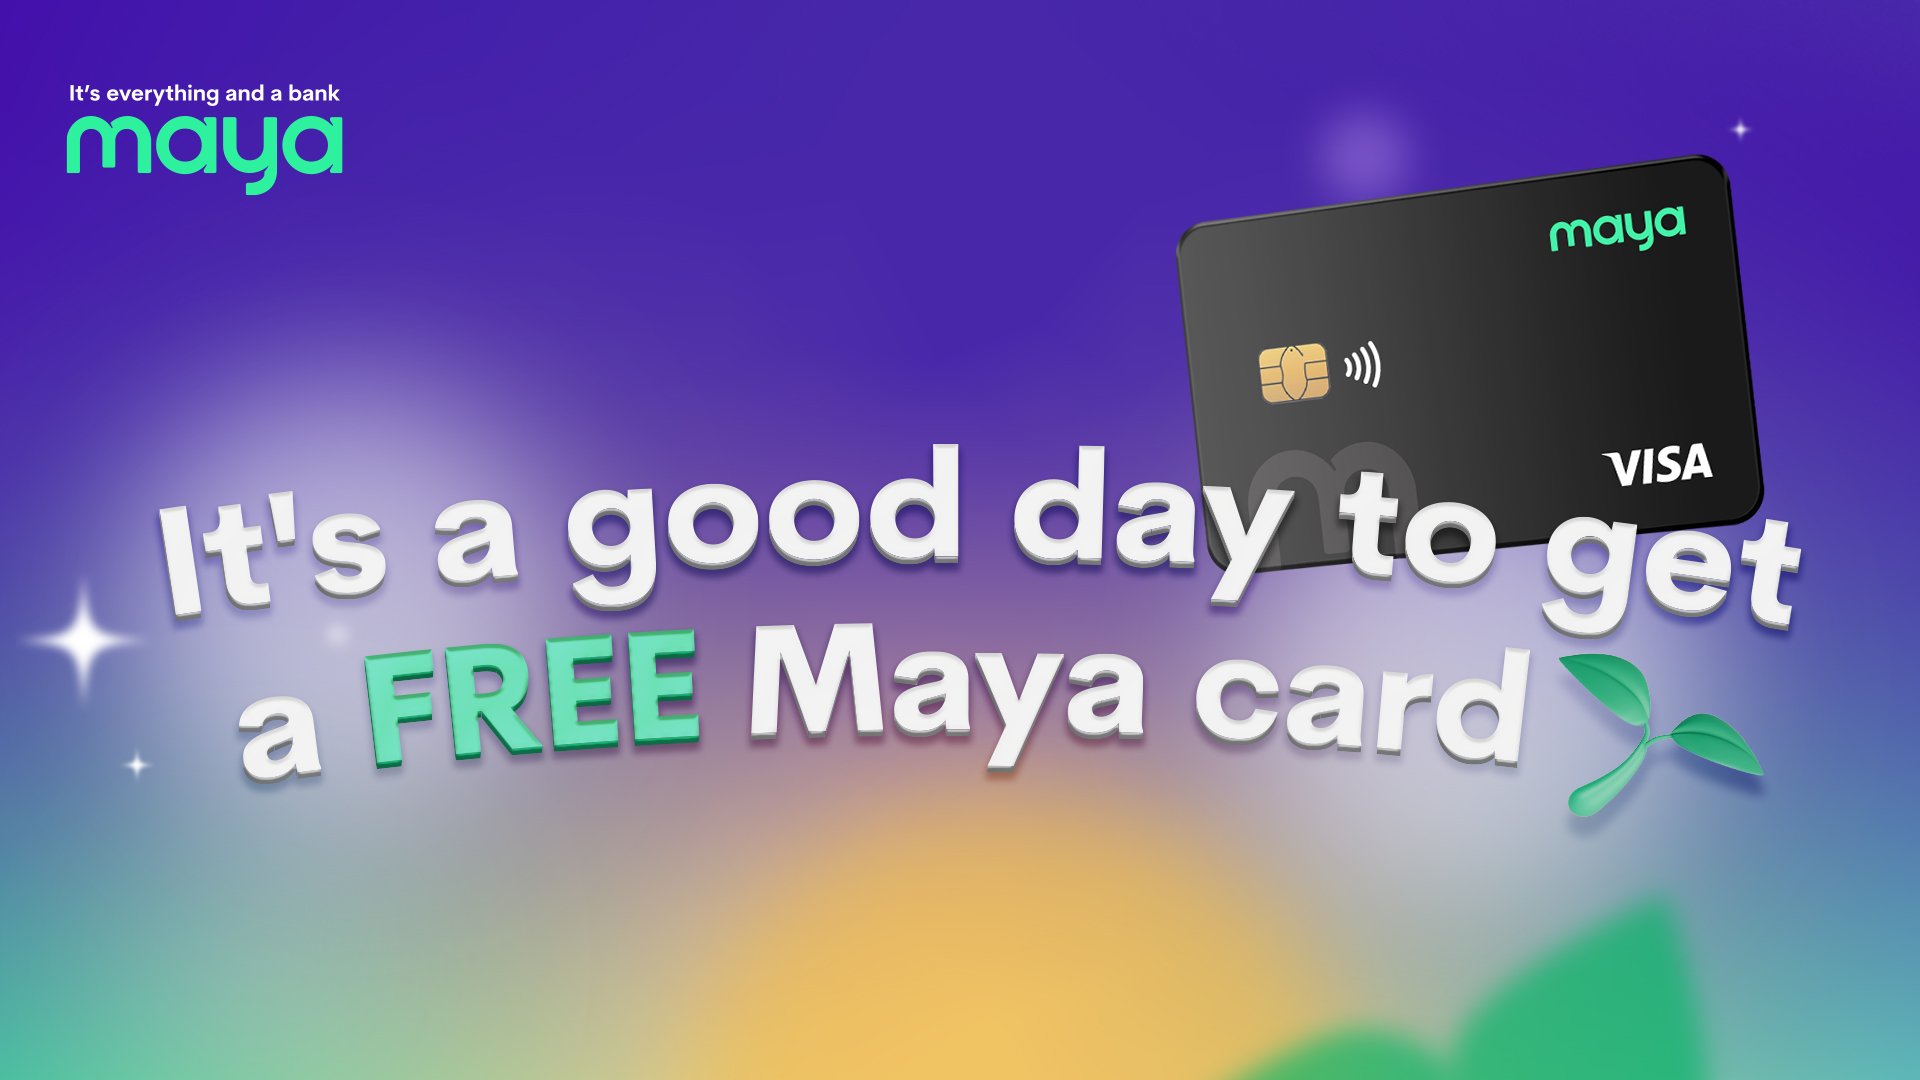 It’s a good day to get a FREE Maya card